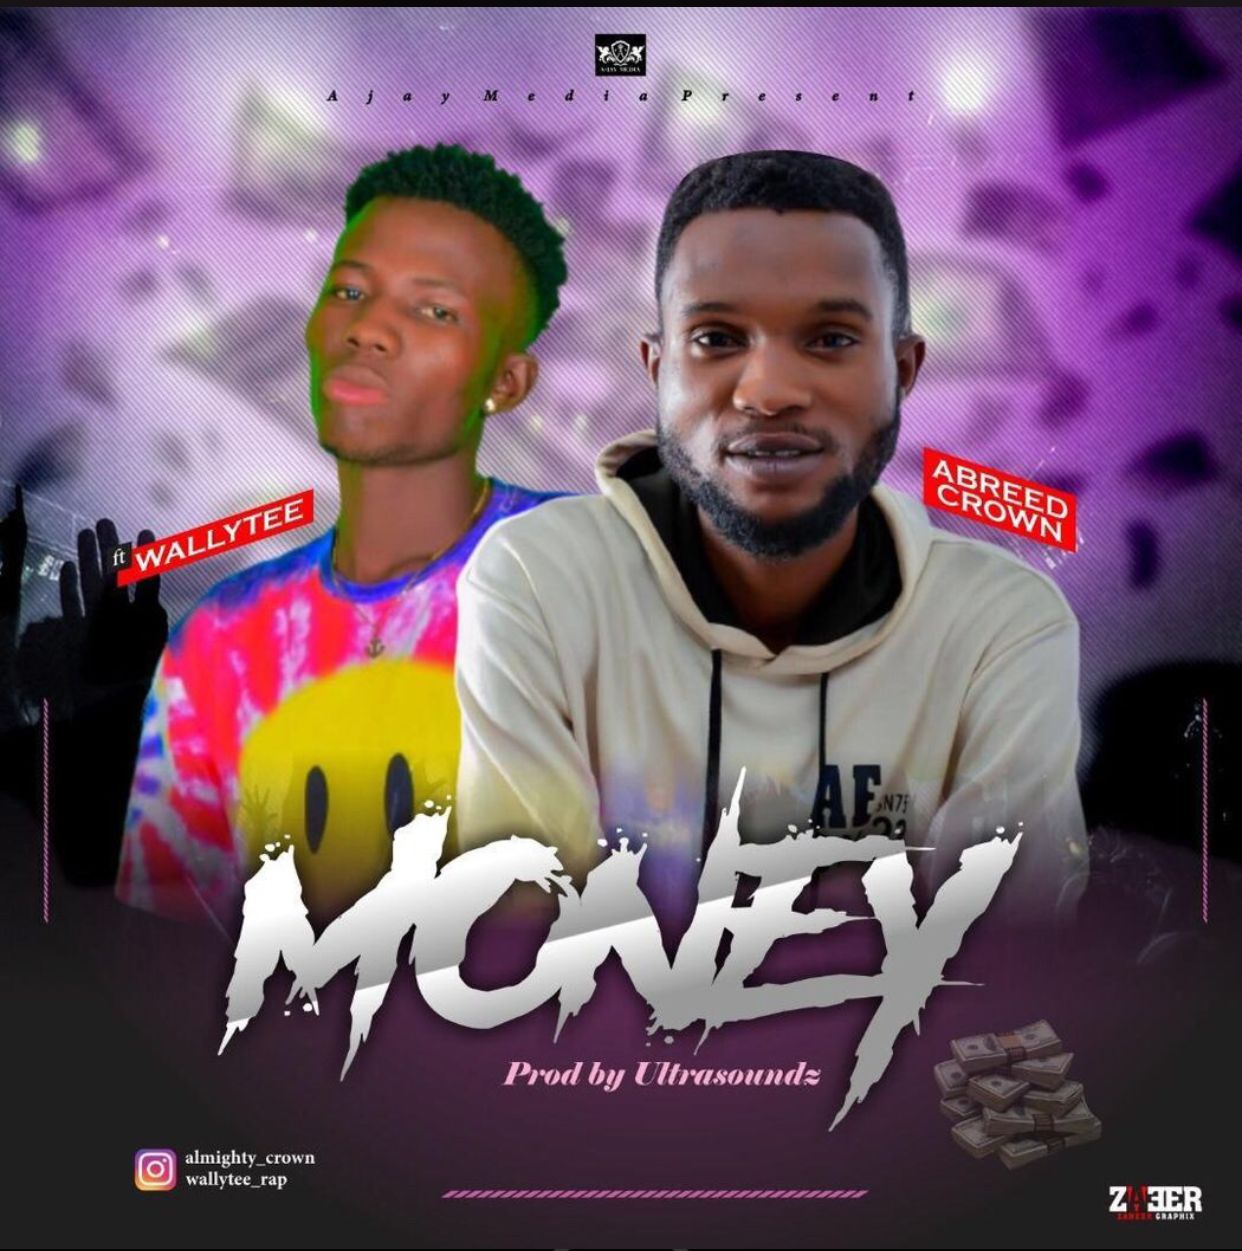 Music : Abreed Crown Ft. Wallytee – Money